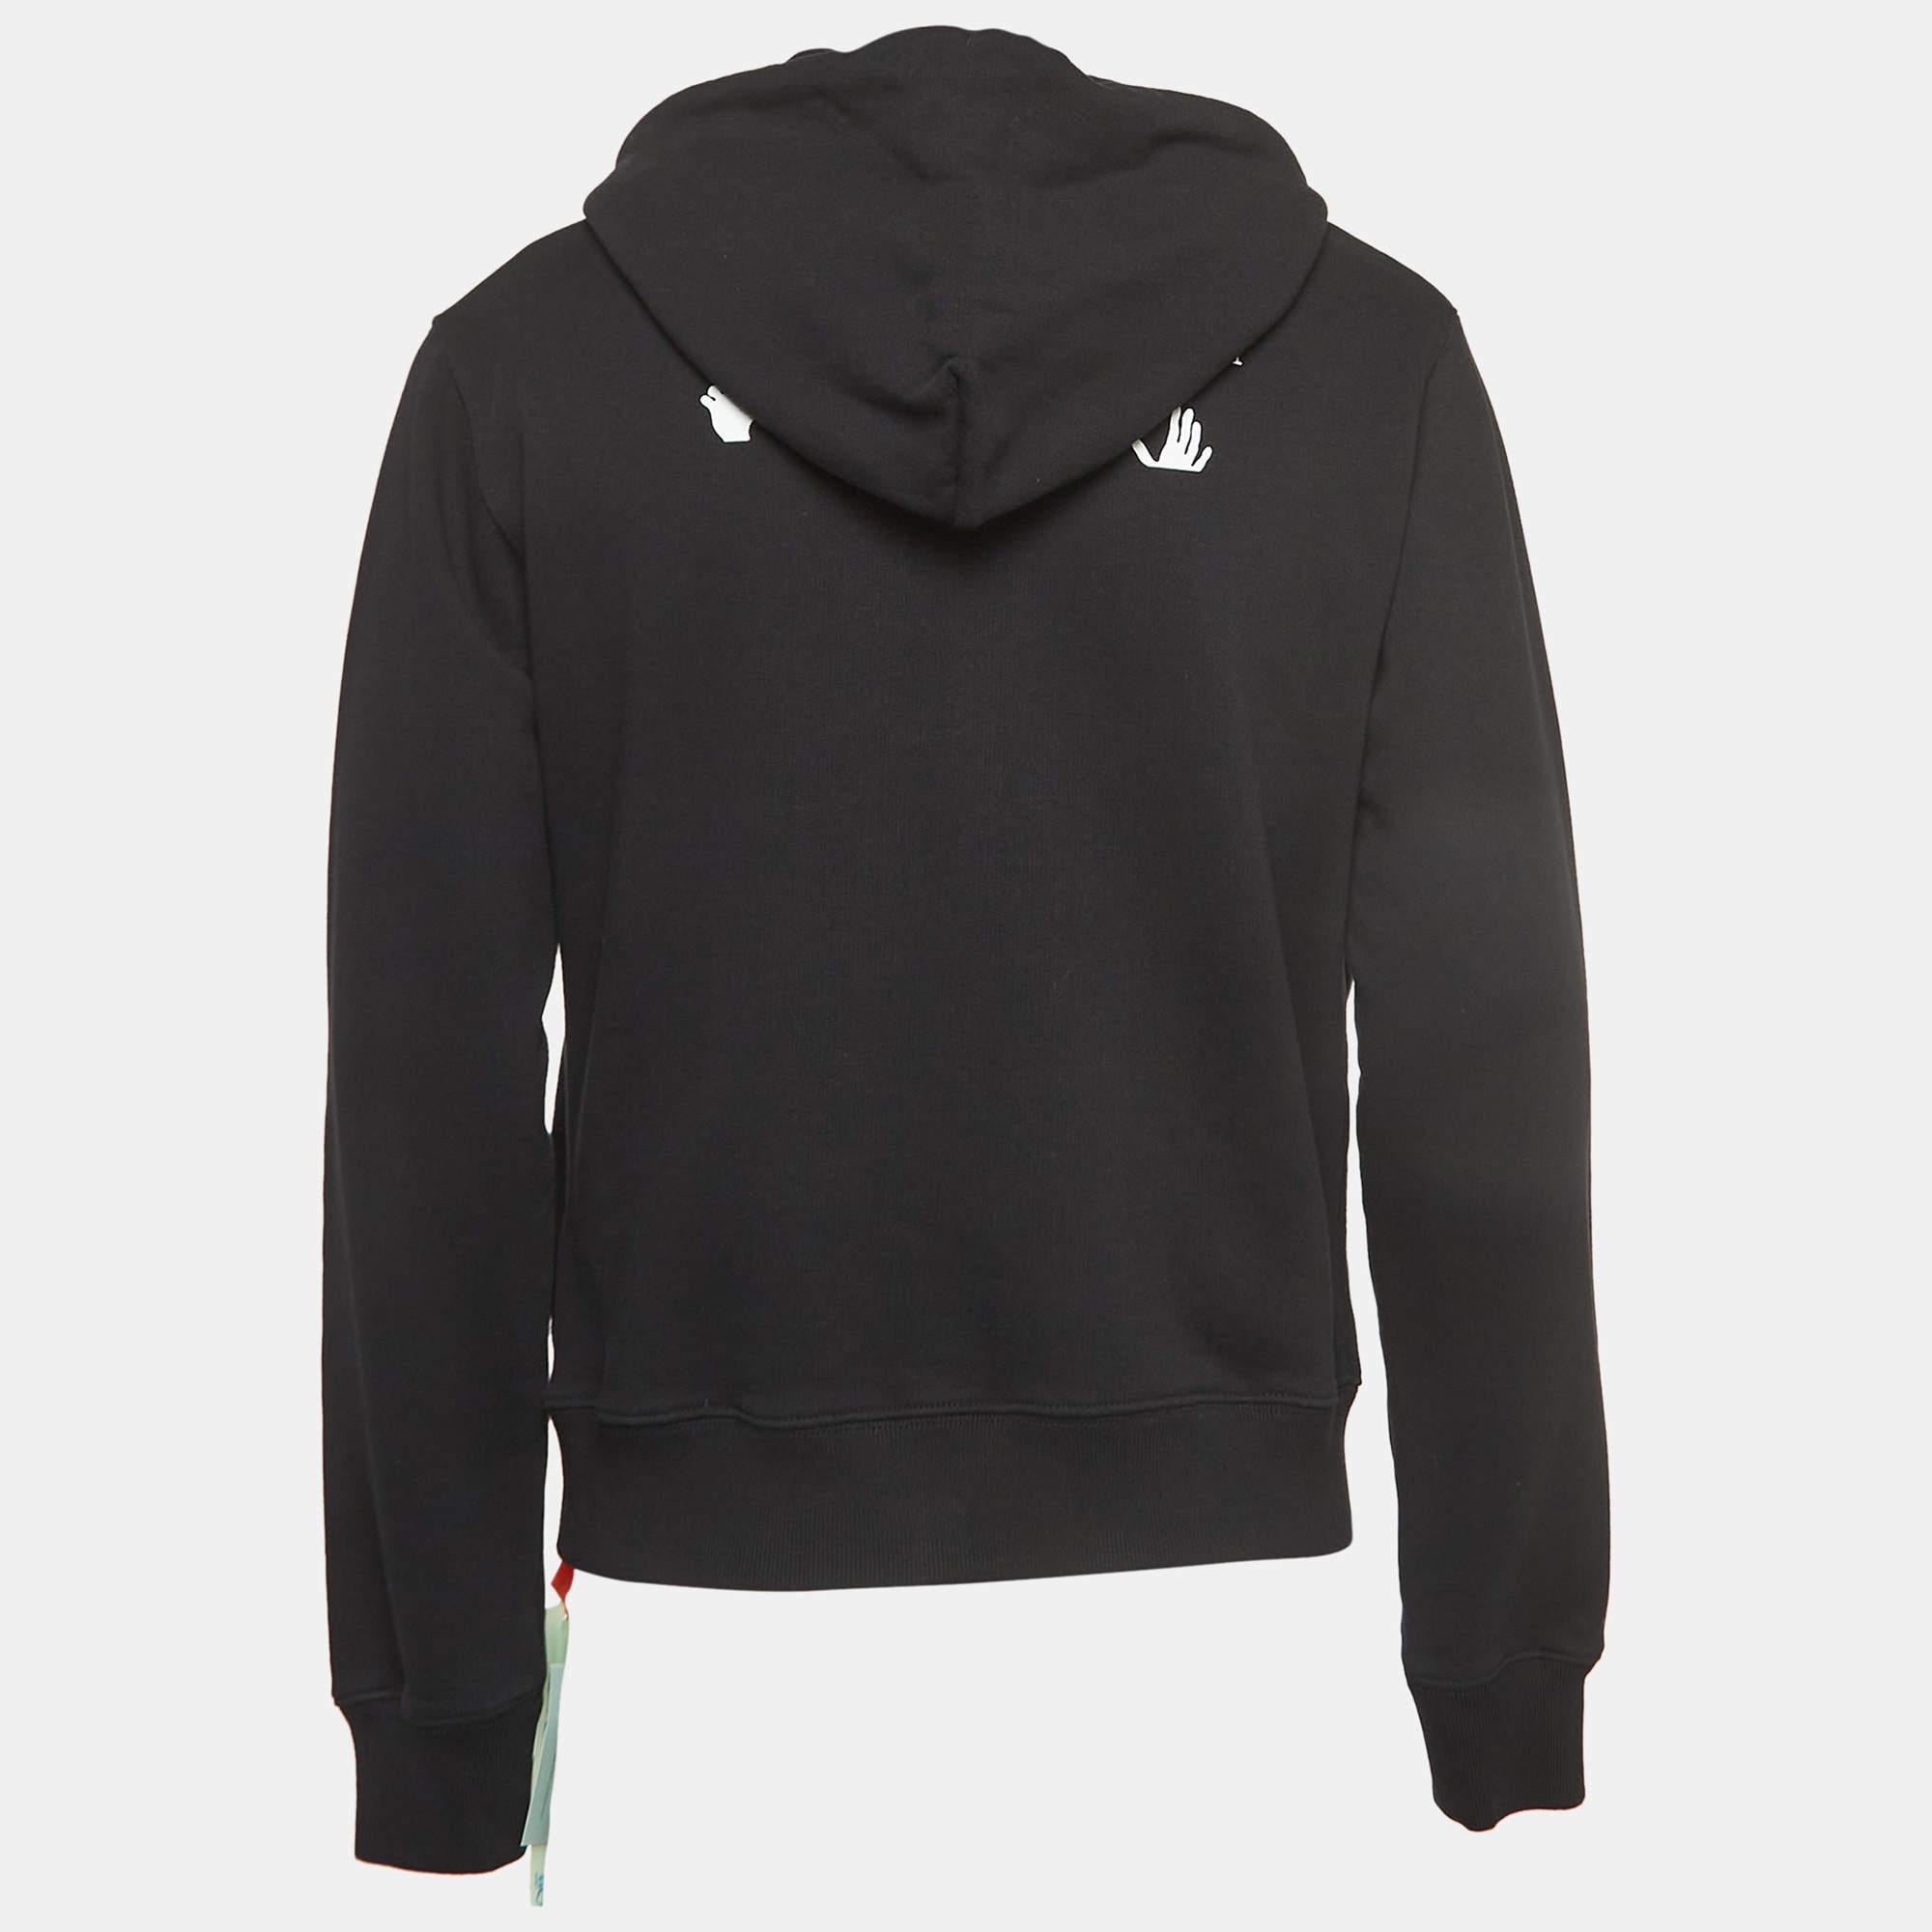 This Off-White hoodie is all about sporting a classy and comfy style. It is tailored from soft fabric, which is highlighted with signature accents.

